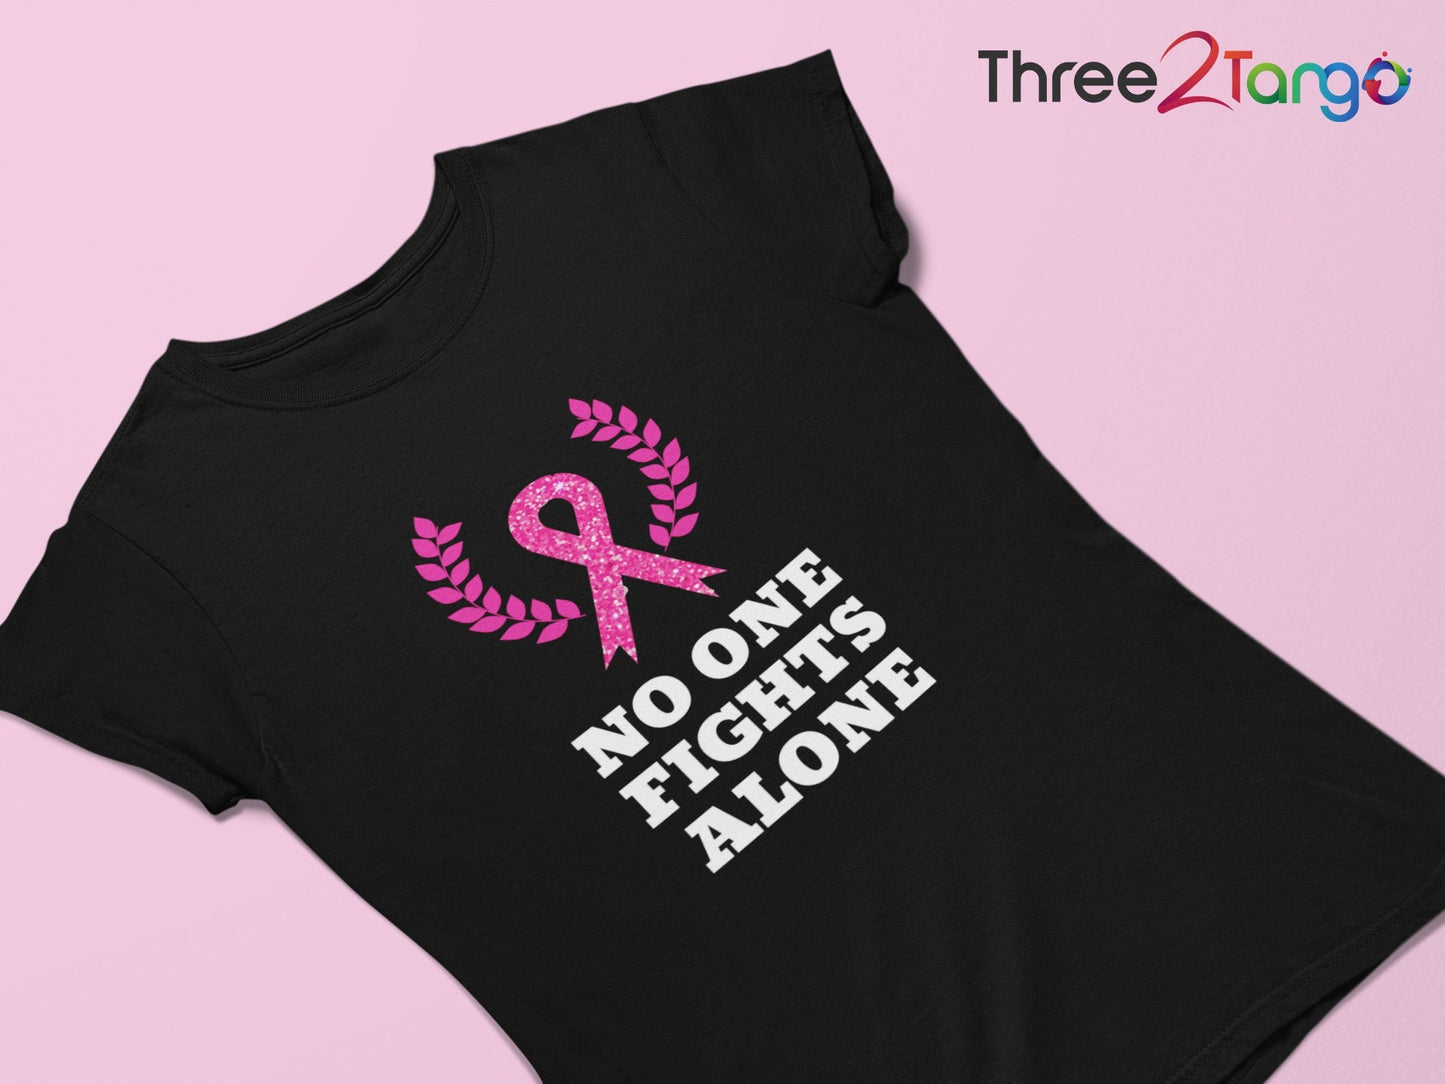 No one fights alone Cancer T-shirt | Breast Cancer Awareness Shirt - Three2Tango Tee's